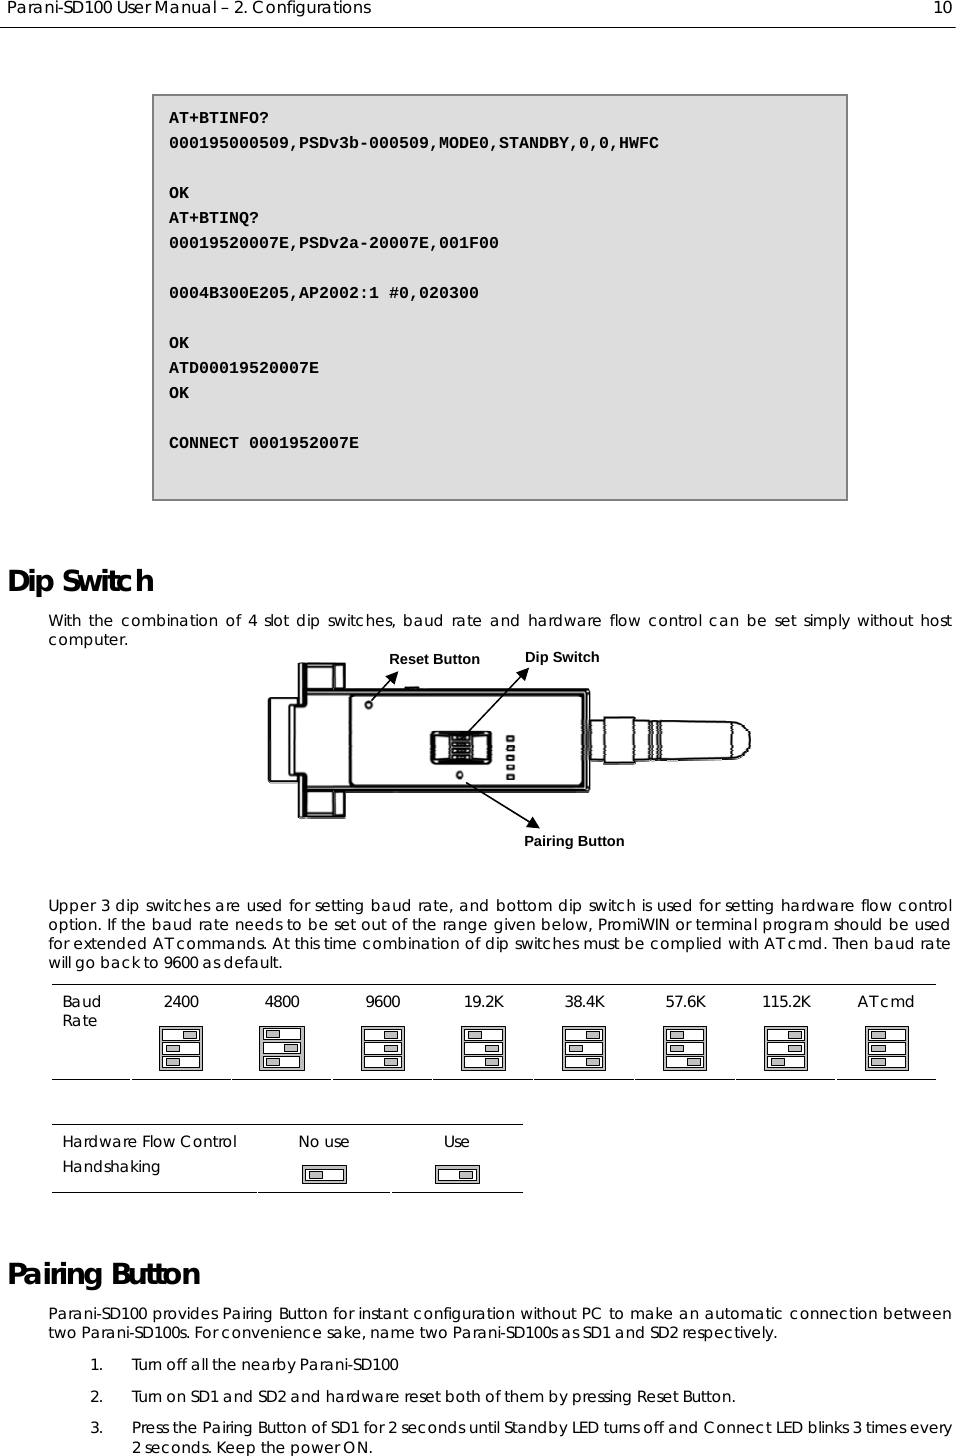  Parani-SD100 User Manual – 2. Configurations  10  Dip Switch With the combination of 4 slot dip switches, baud rate and hardware flow control can be set simply without host computer.    Upper 3 dip switches are used for setting baud rate, and bottom dip switch is used for setting hardware flow control option. If the baud rate needs to be set out of the range given below, PromiWIN or terminal program should be used for extended AT commands. At this time combination of dip switches must be complied with AT cmd. Then baud rate will go back to 9600 as default. 2400 4800 9600 19.2K 38.4K 57.6K 115.2K AT cmd Baud Rate                 No use  Use Hardware Flow Control Handshaking     Pairing Button Parani-SD100 provides Pairing Button for instant configuration without PC to make an automatic connection between two Parani-SD100s. For convenience sake, name two Parani-SD100s as SD1 and SD2 respectively. 1. Turn off all the nearby Parani-SD100 2. Turn on SD1 and SD2 and hardware reset both of them by pressing Reset Button. 3. Press the Pairing Button of SD1 for 2 seconds until Standby LED turns off and Connect LED blinks 3 times every 2 seconds. Keep the power ON. AT+BTINFO? 000195000509,PSDv3b-000509,MODE0,STANDBY,0,0,HWFC  OK AT+BTINQ? 00019520007E,PSDv2a-20007E,001F00  0004B300E205,AP2002:1 #0,020300  OK ATD00019520007E OK  CONNECT 0001952007E Pairing Button Dip Switch Reset Button 